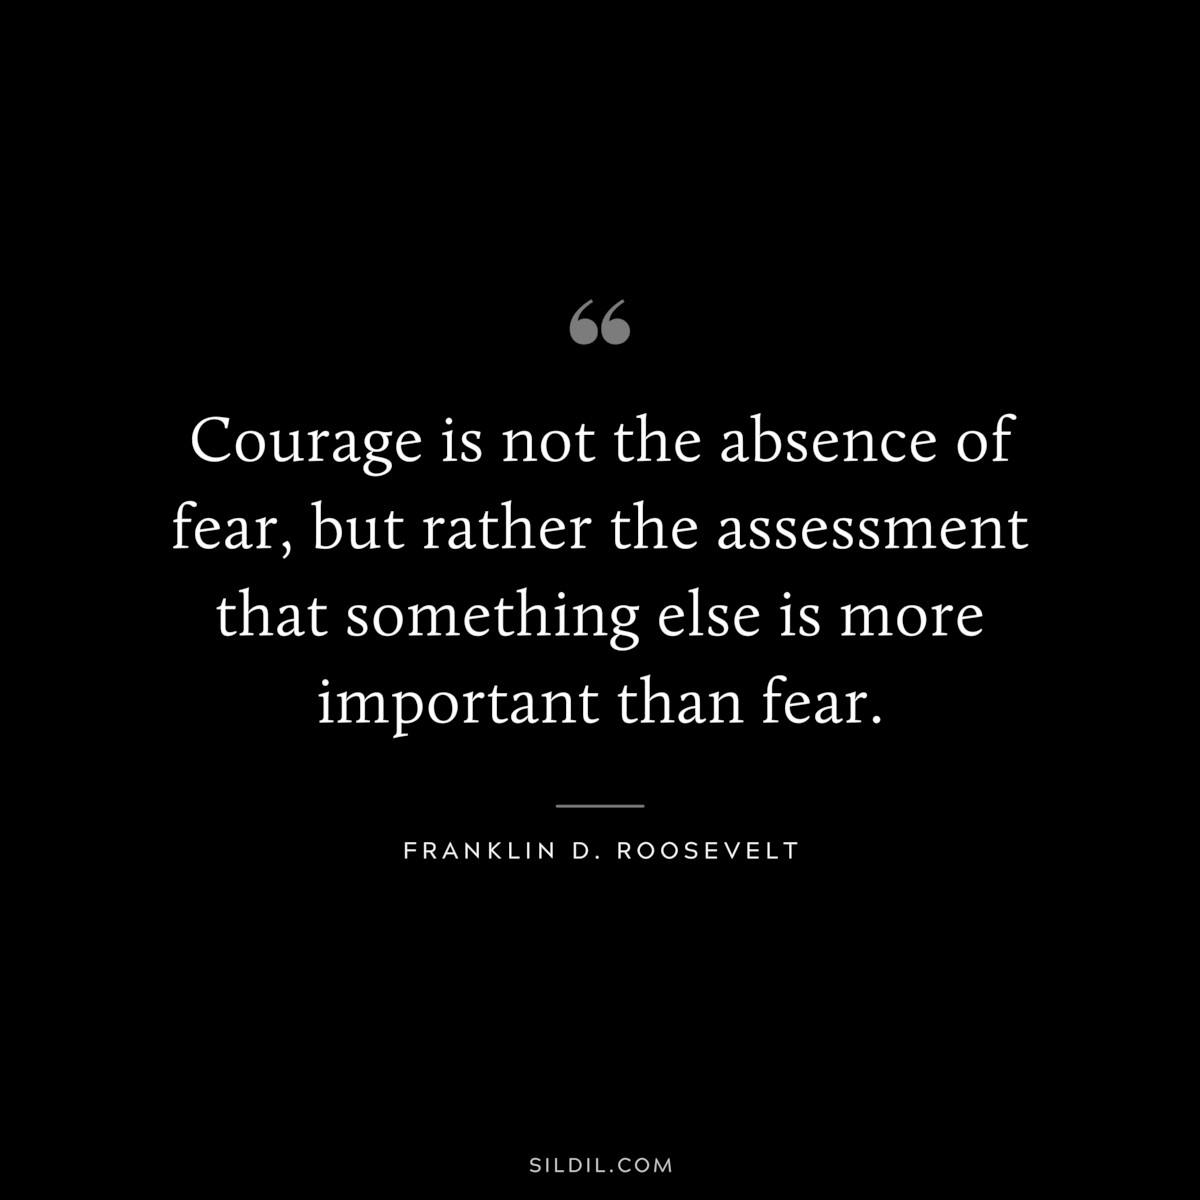 Courage is not the absence of fear, but rather the assessment that something else is more important than fear. ― Franklin D. Roosevelt